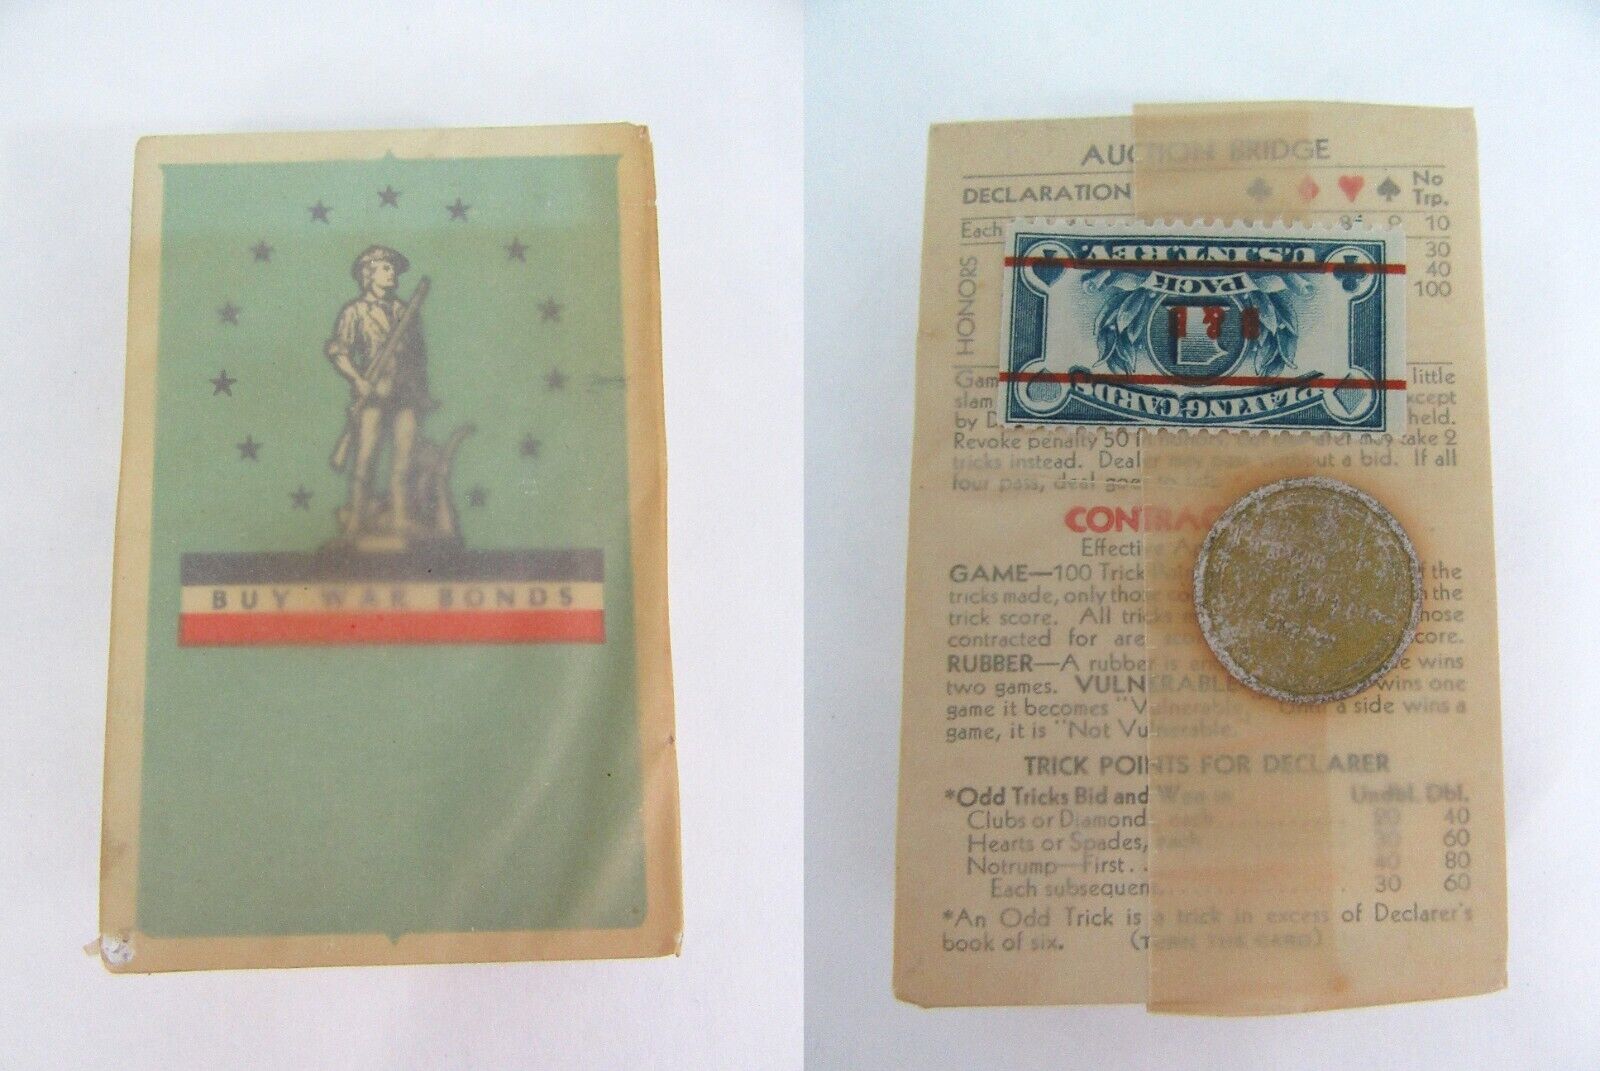 Vintage WWII 1940s Playing Cards Full Deck BUY WAR SAVINGS BONDS with Tax Stamps